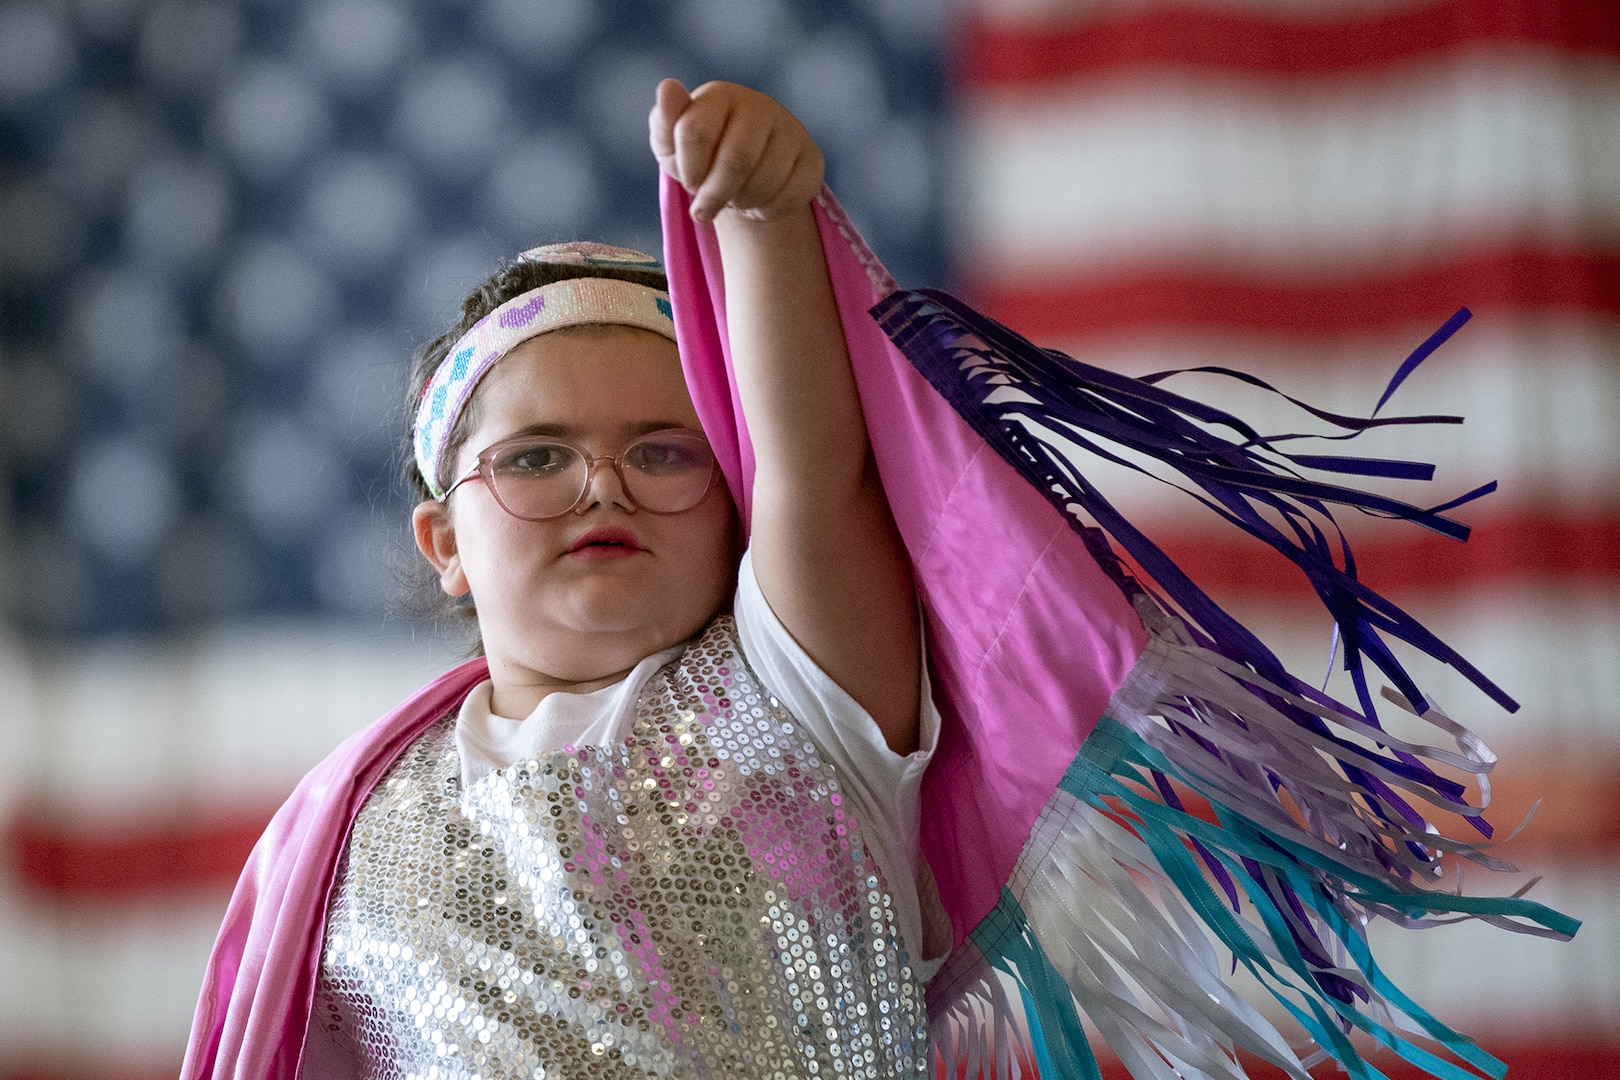 A Native American girl dances during opening ceremonies for the 13th CISM (International Military Sports Council) World Military Women’s Football Championship at Fairchild Air Force Base in Spokane, Wash. July 10, 2022. (DoD photo by EJ Hersom)